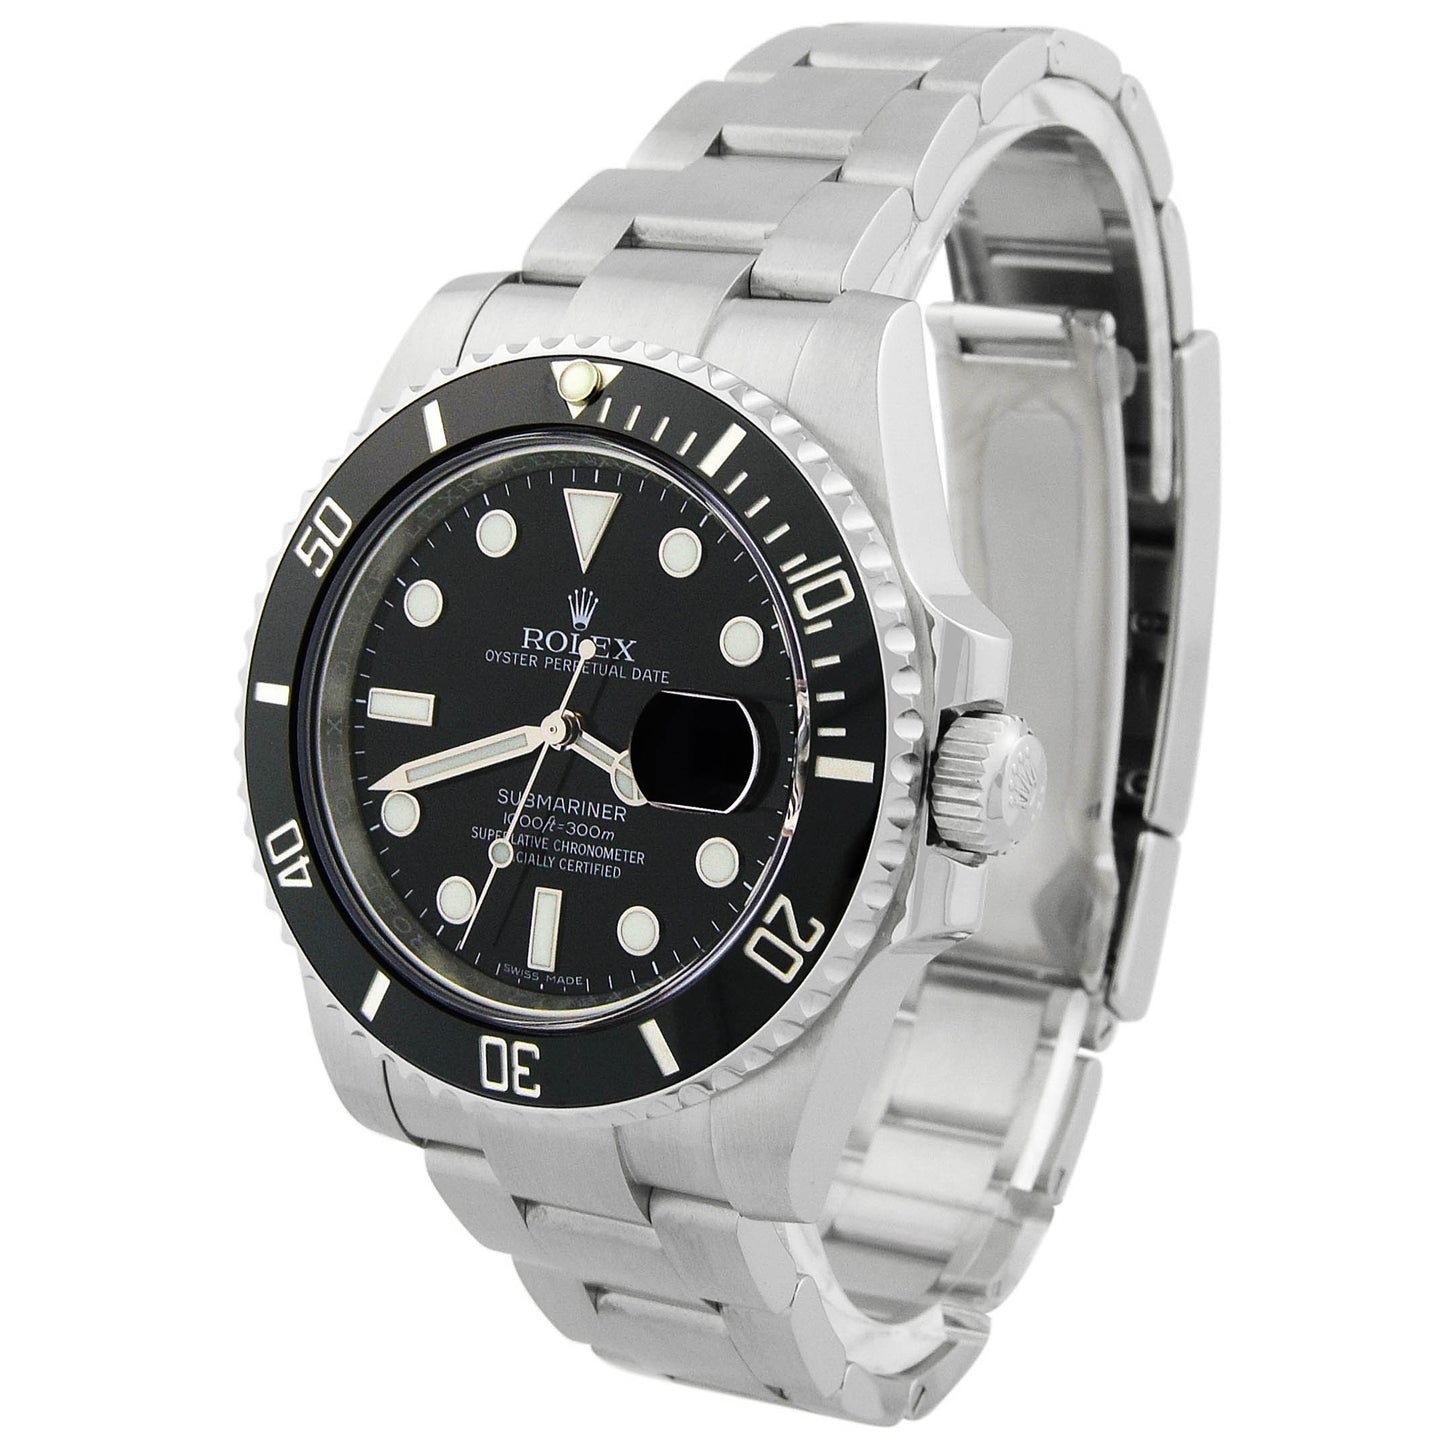 Rolex Submariner Stainless Steel 40mm Black Dot Dial Watch Reference# 116610LN - Happy Jewelers Fine Jewelry Lifetime Warranty